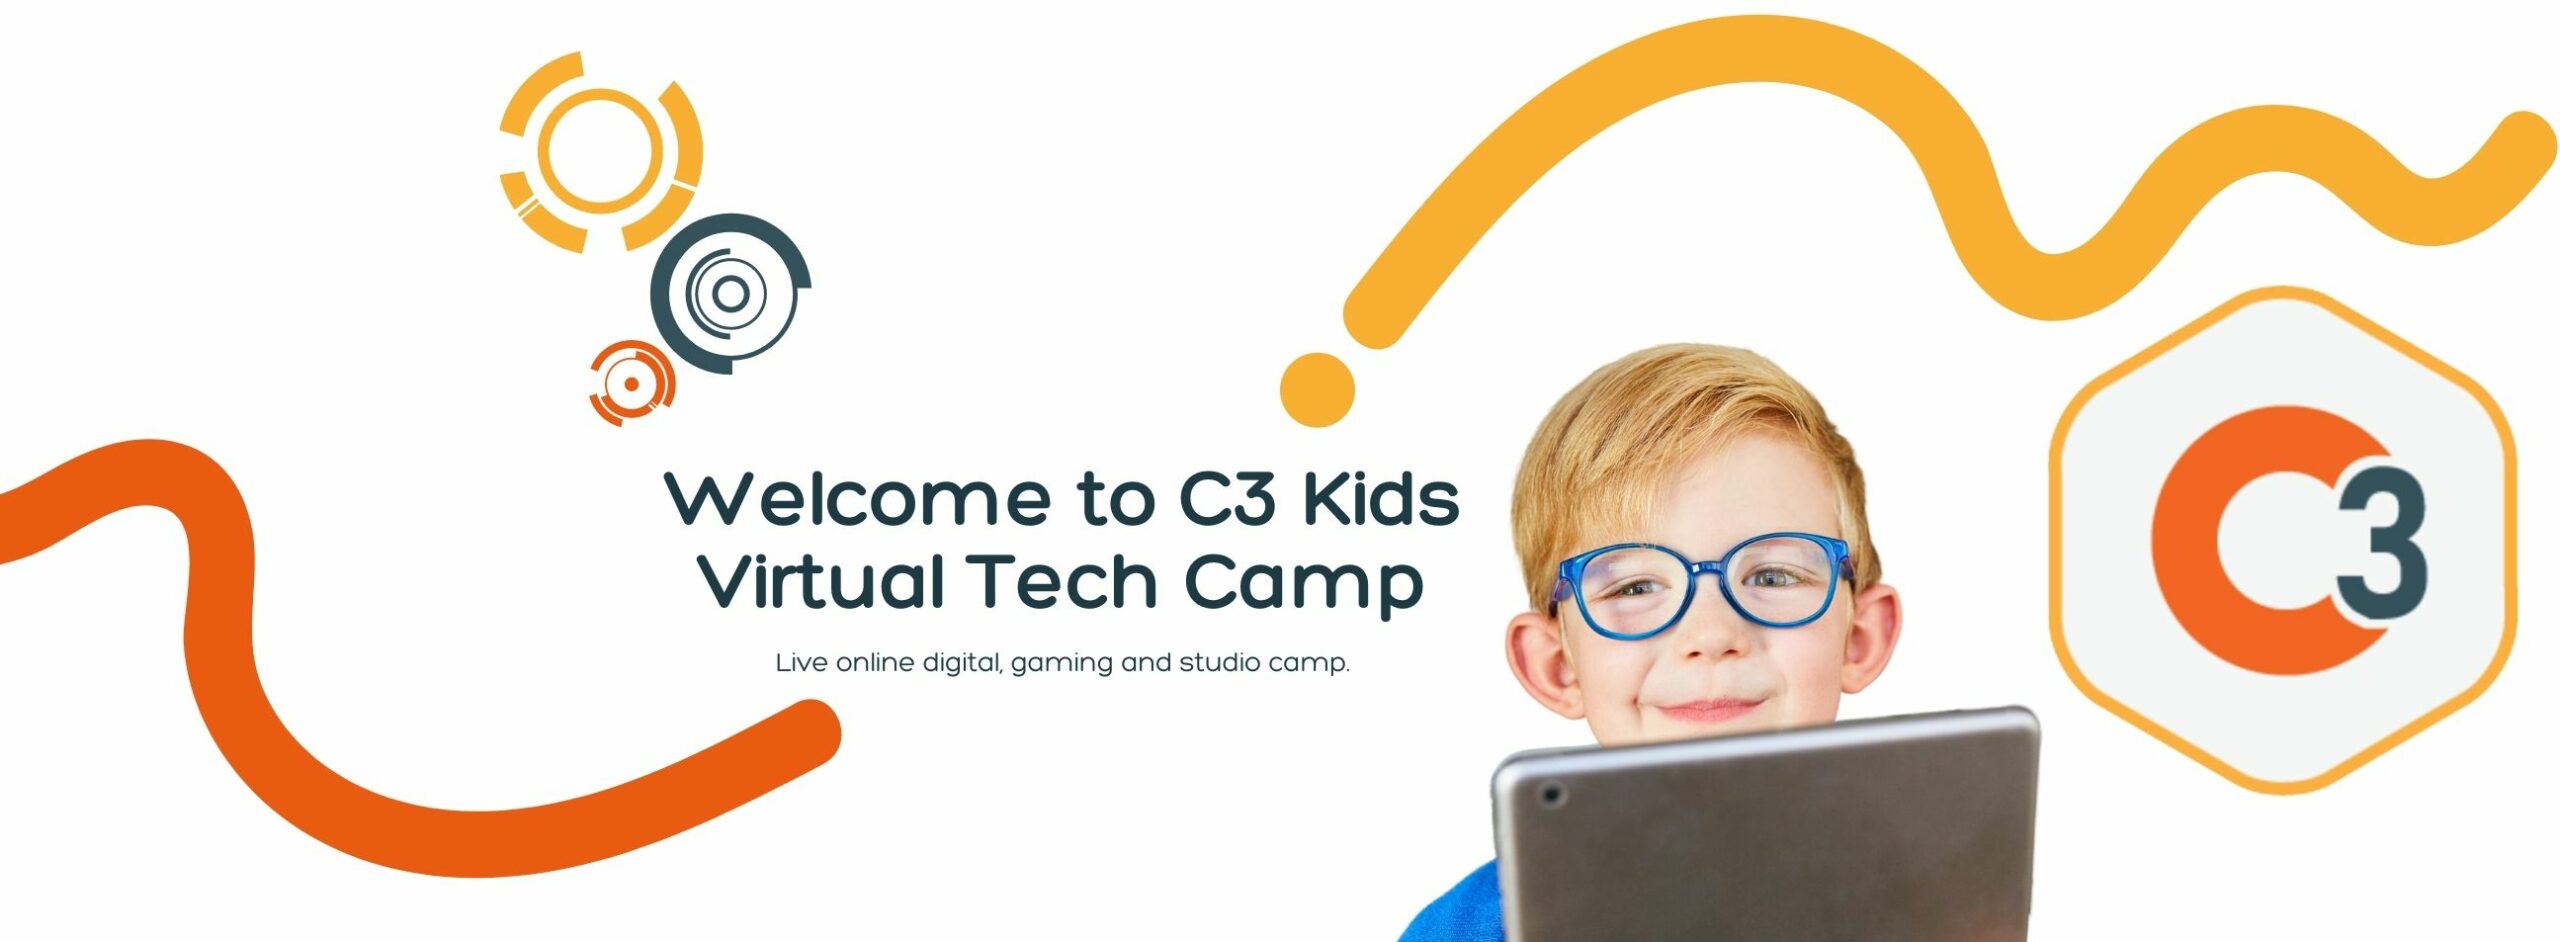 Welcome The New C3 Kids!